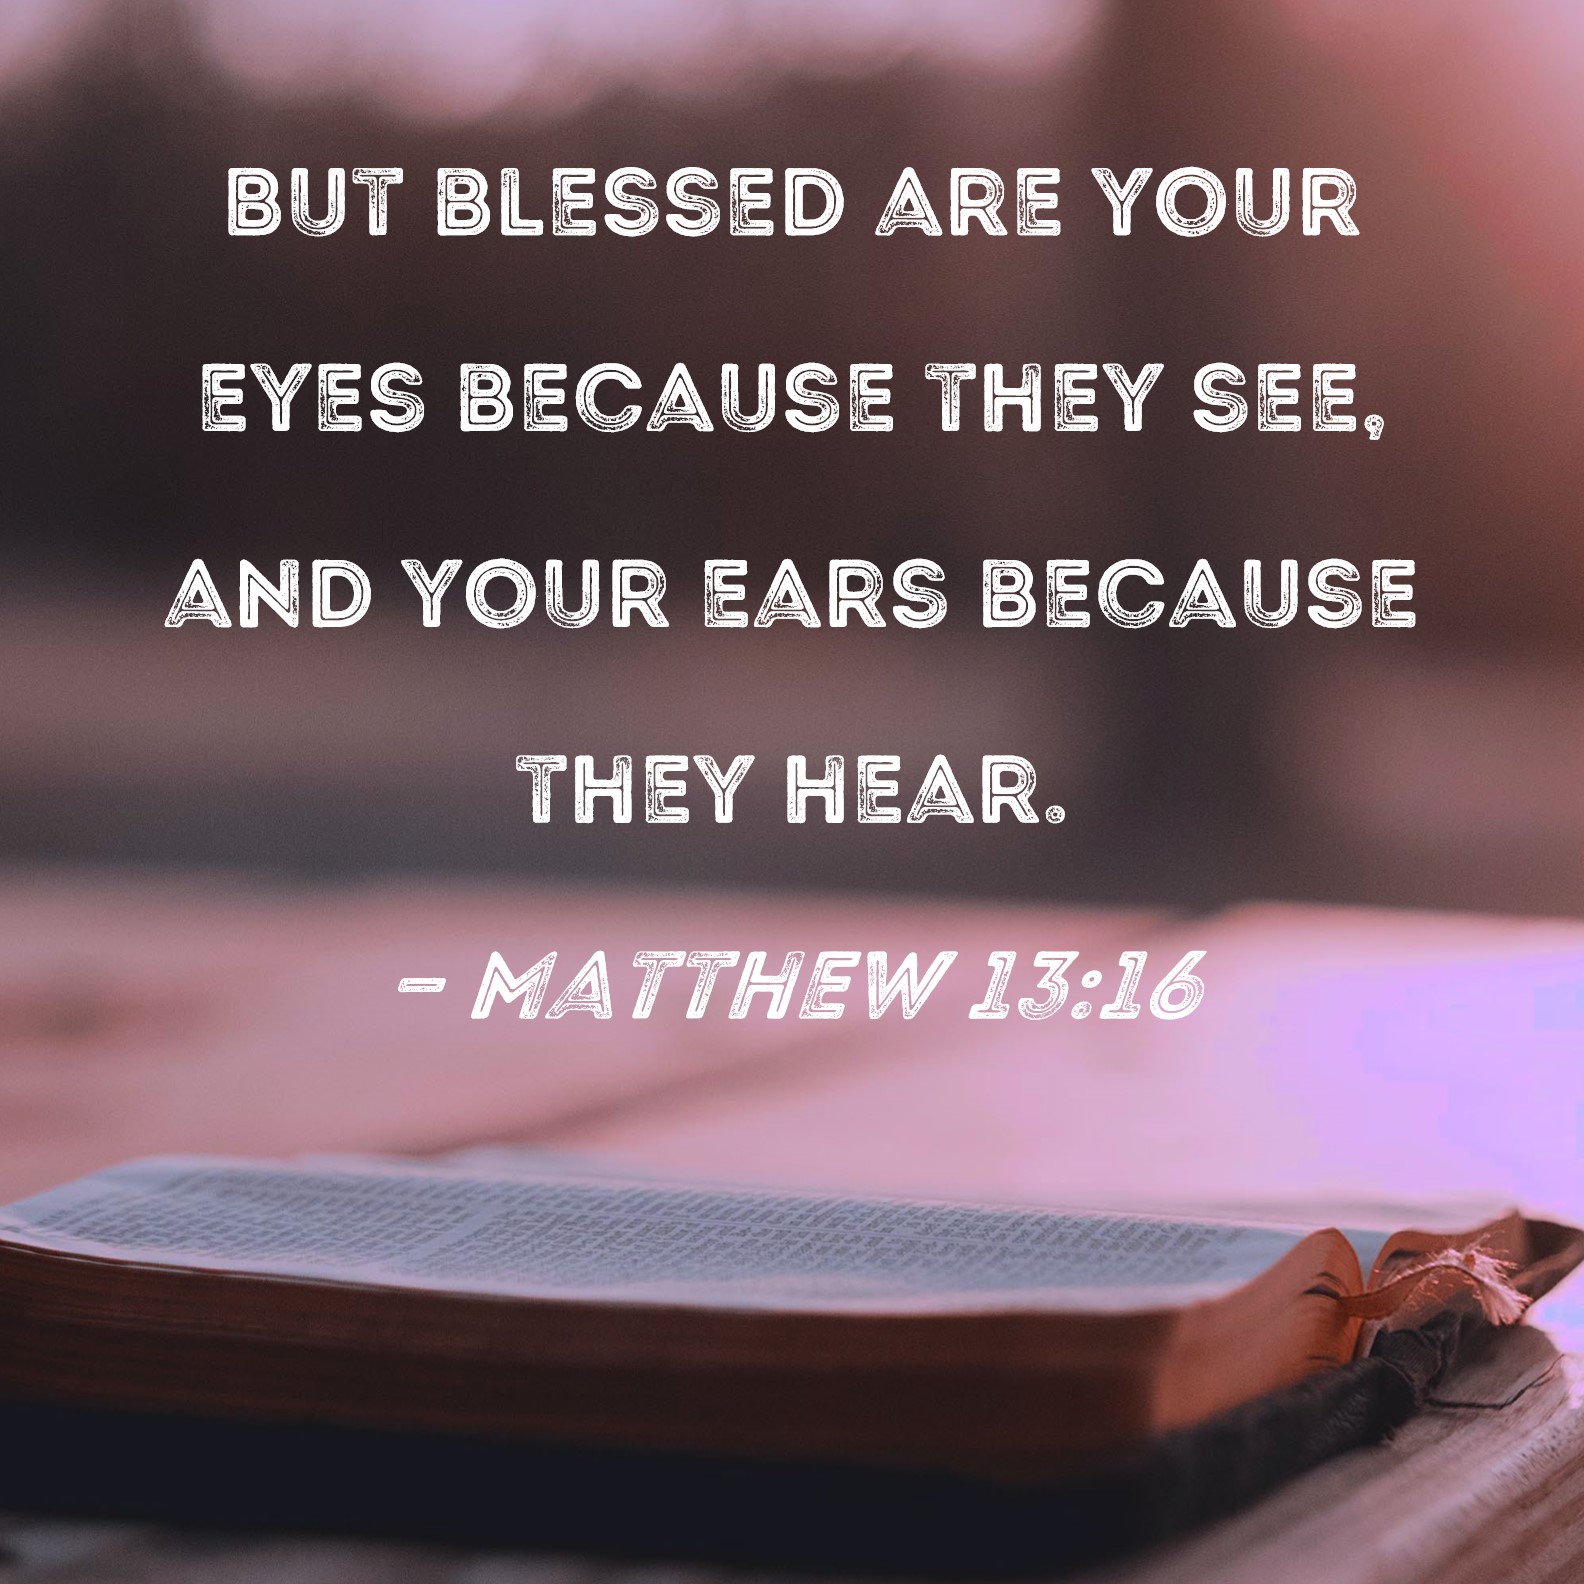 bible verse open your eyes